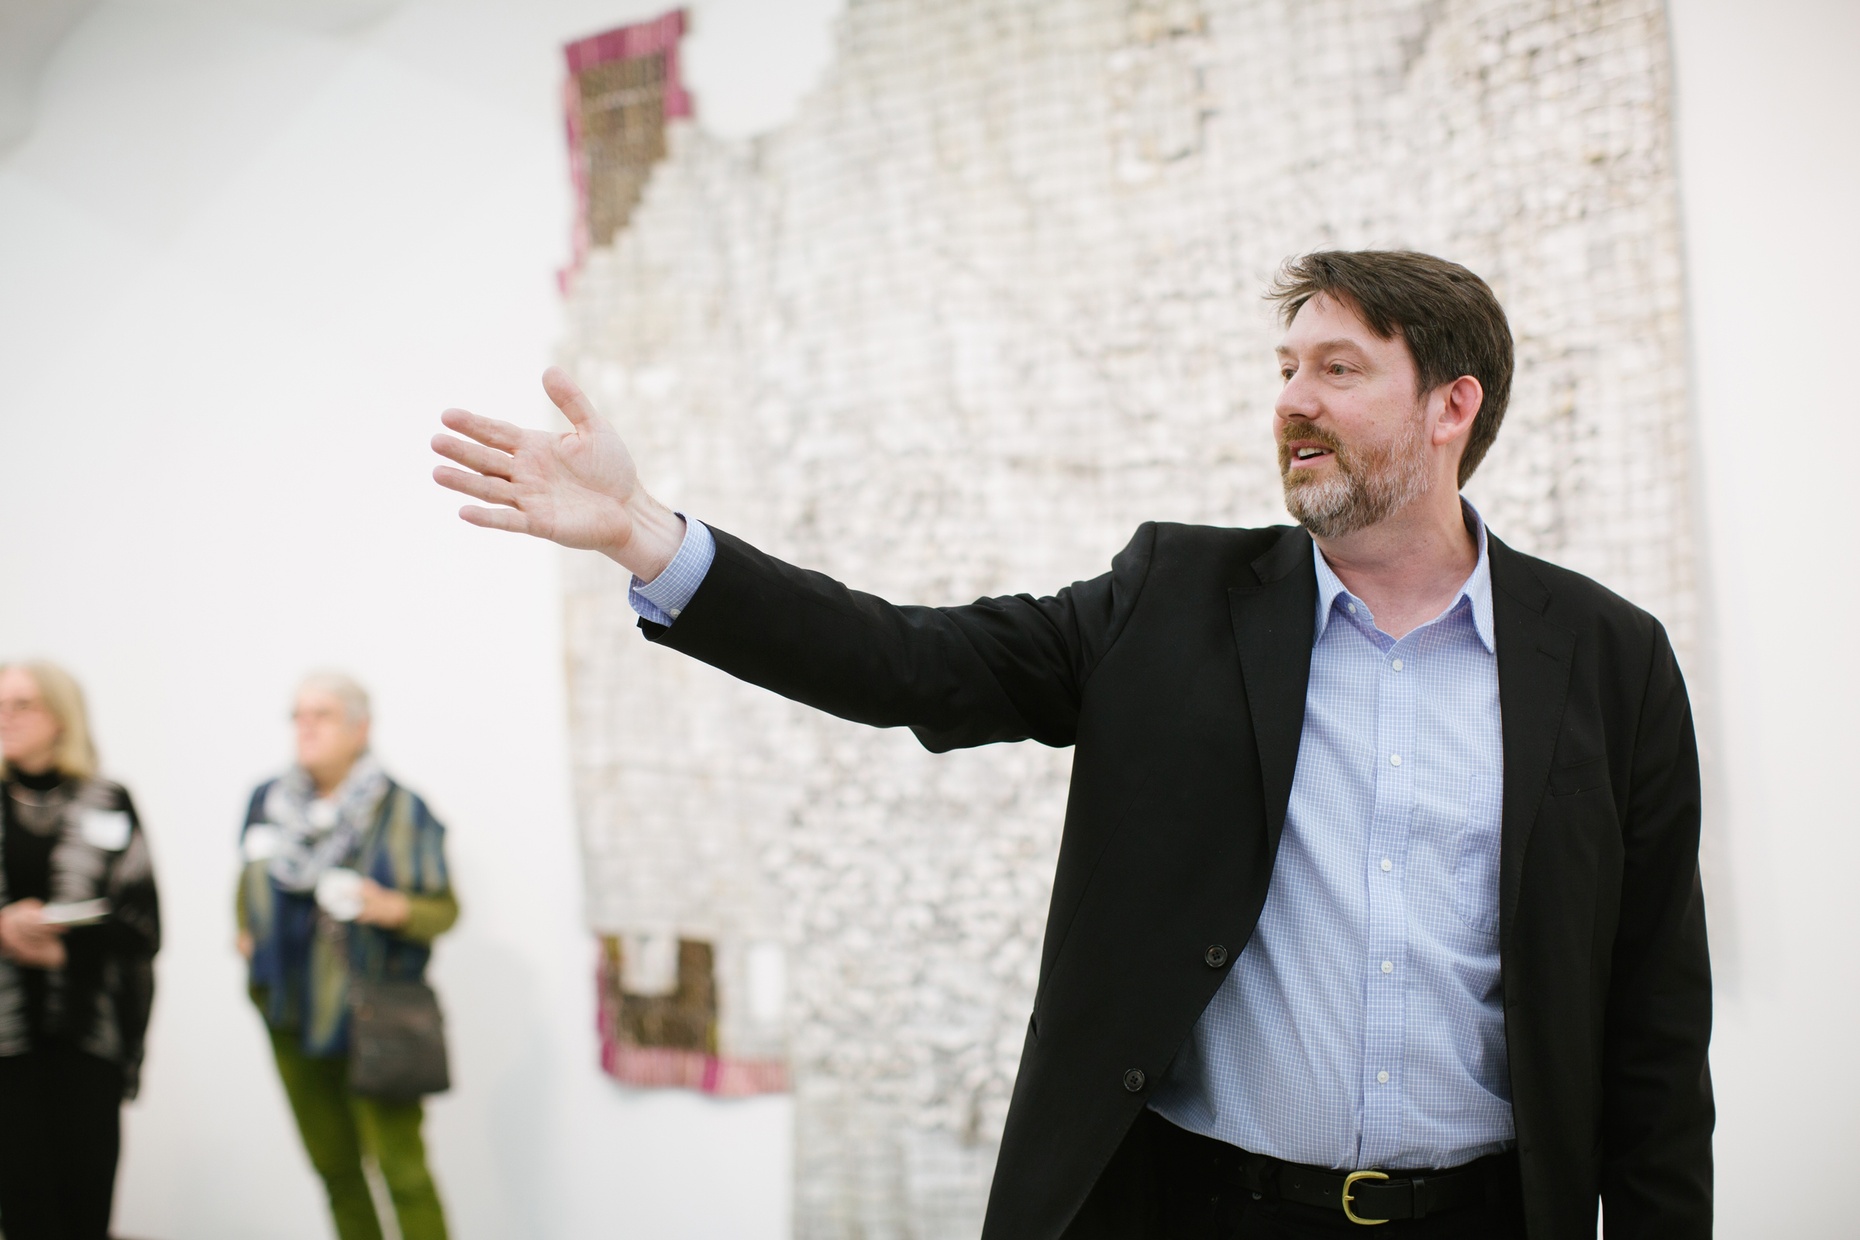 A middle-aged, white man stands with one arm raised in front of a large artwork hung on a white wall.